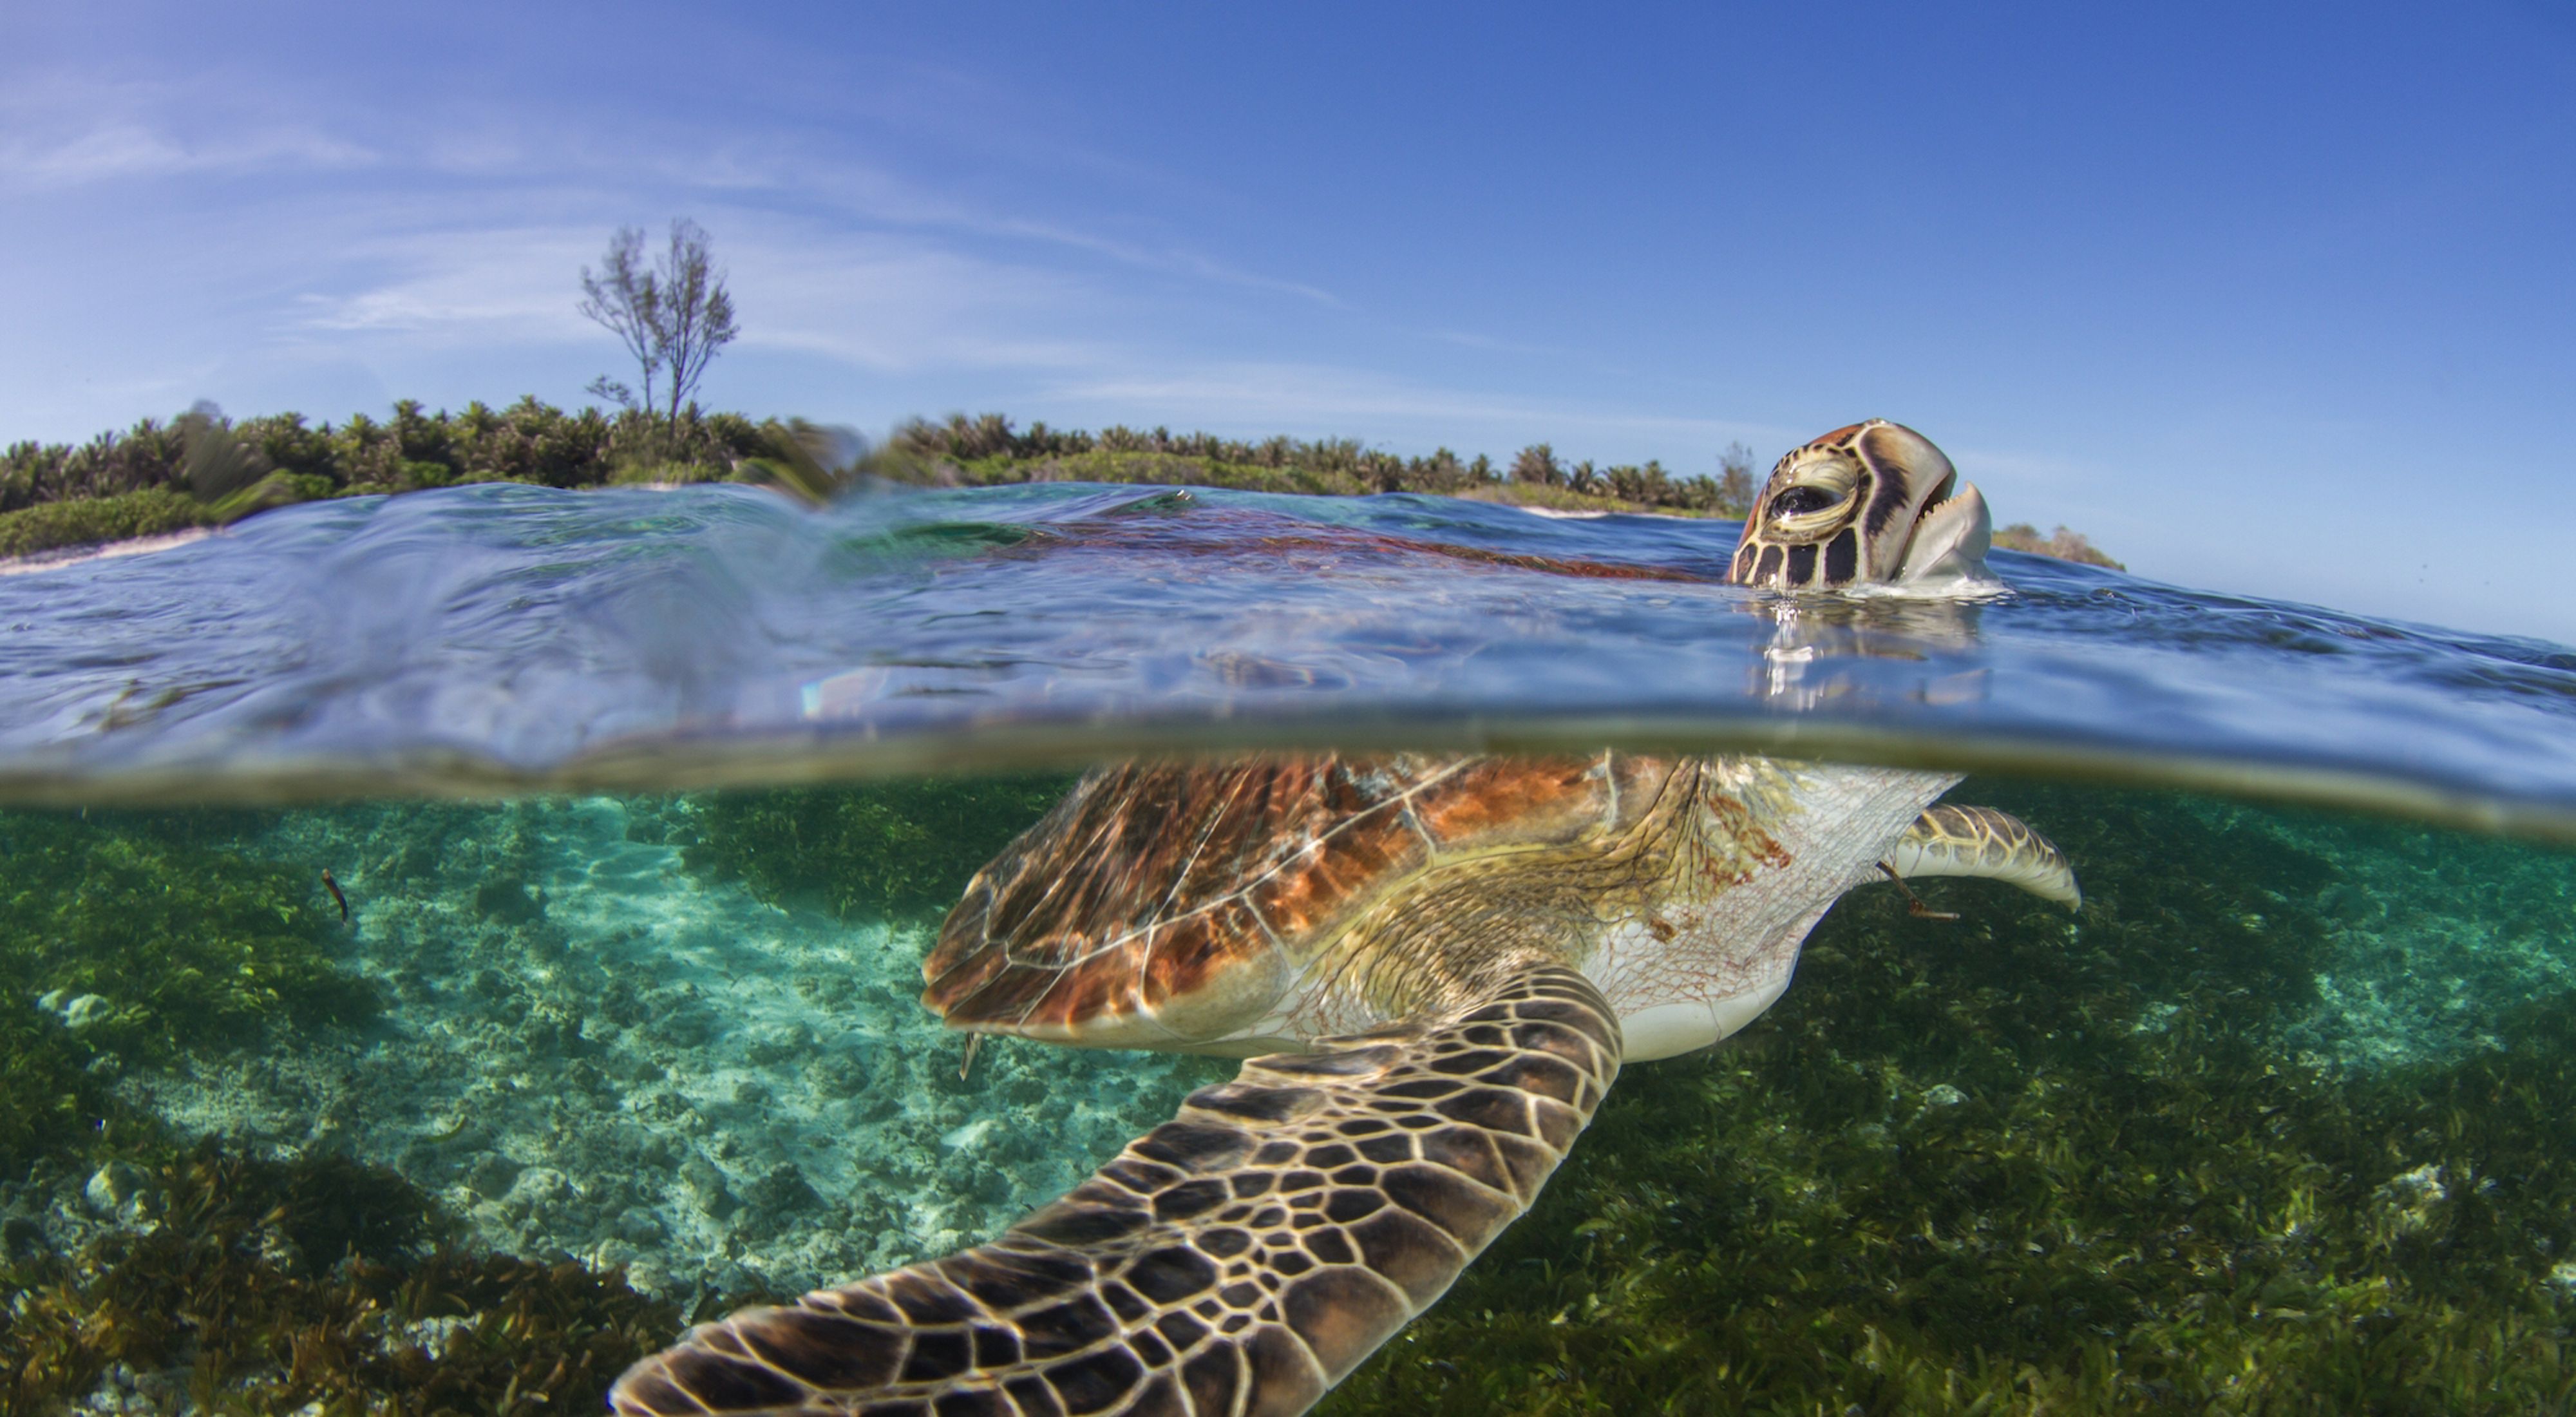 A young green turtle pauses from feeding on seagrass to take a breath of air, Bird Island, Seychelles.

